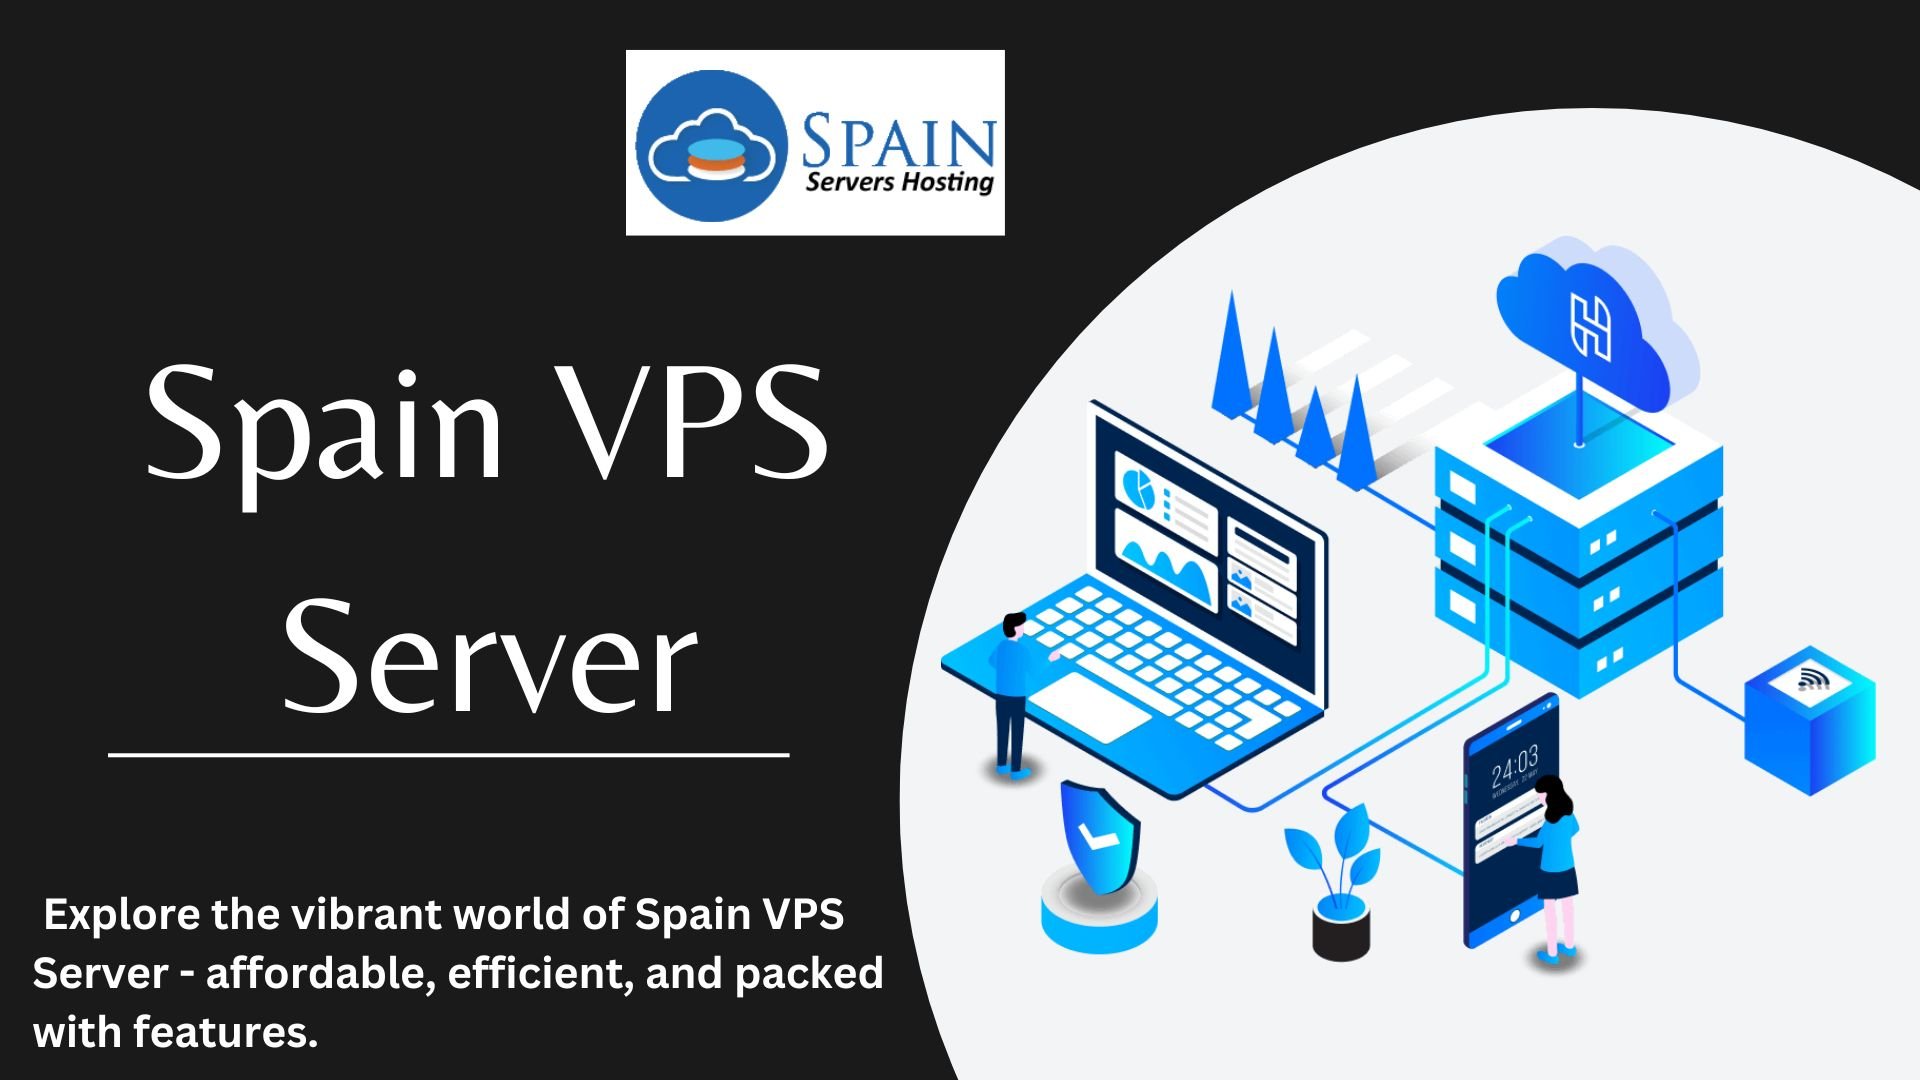 Finding Your Perfect Spain VPS Server for Your Business Growth